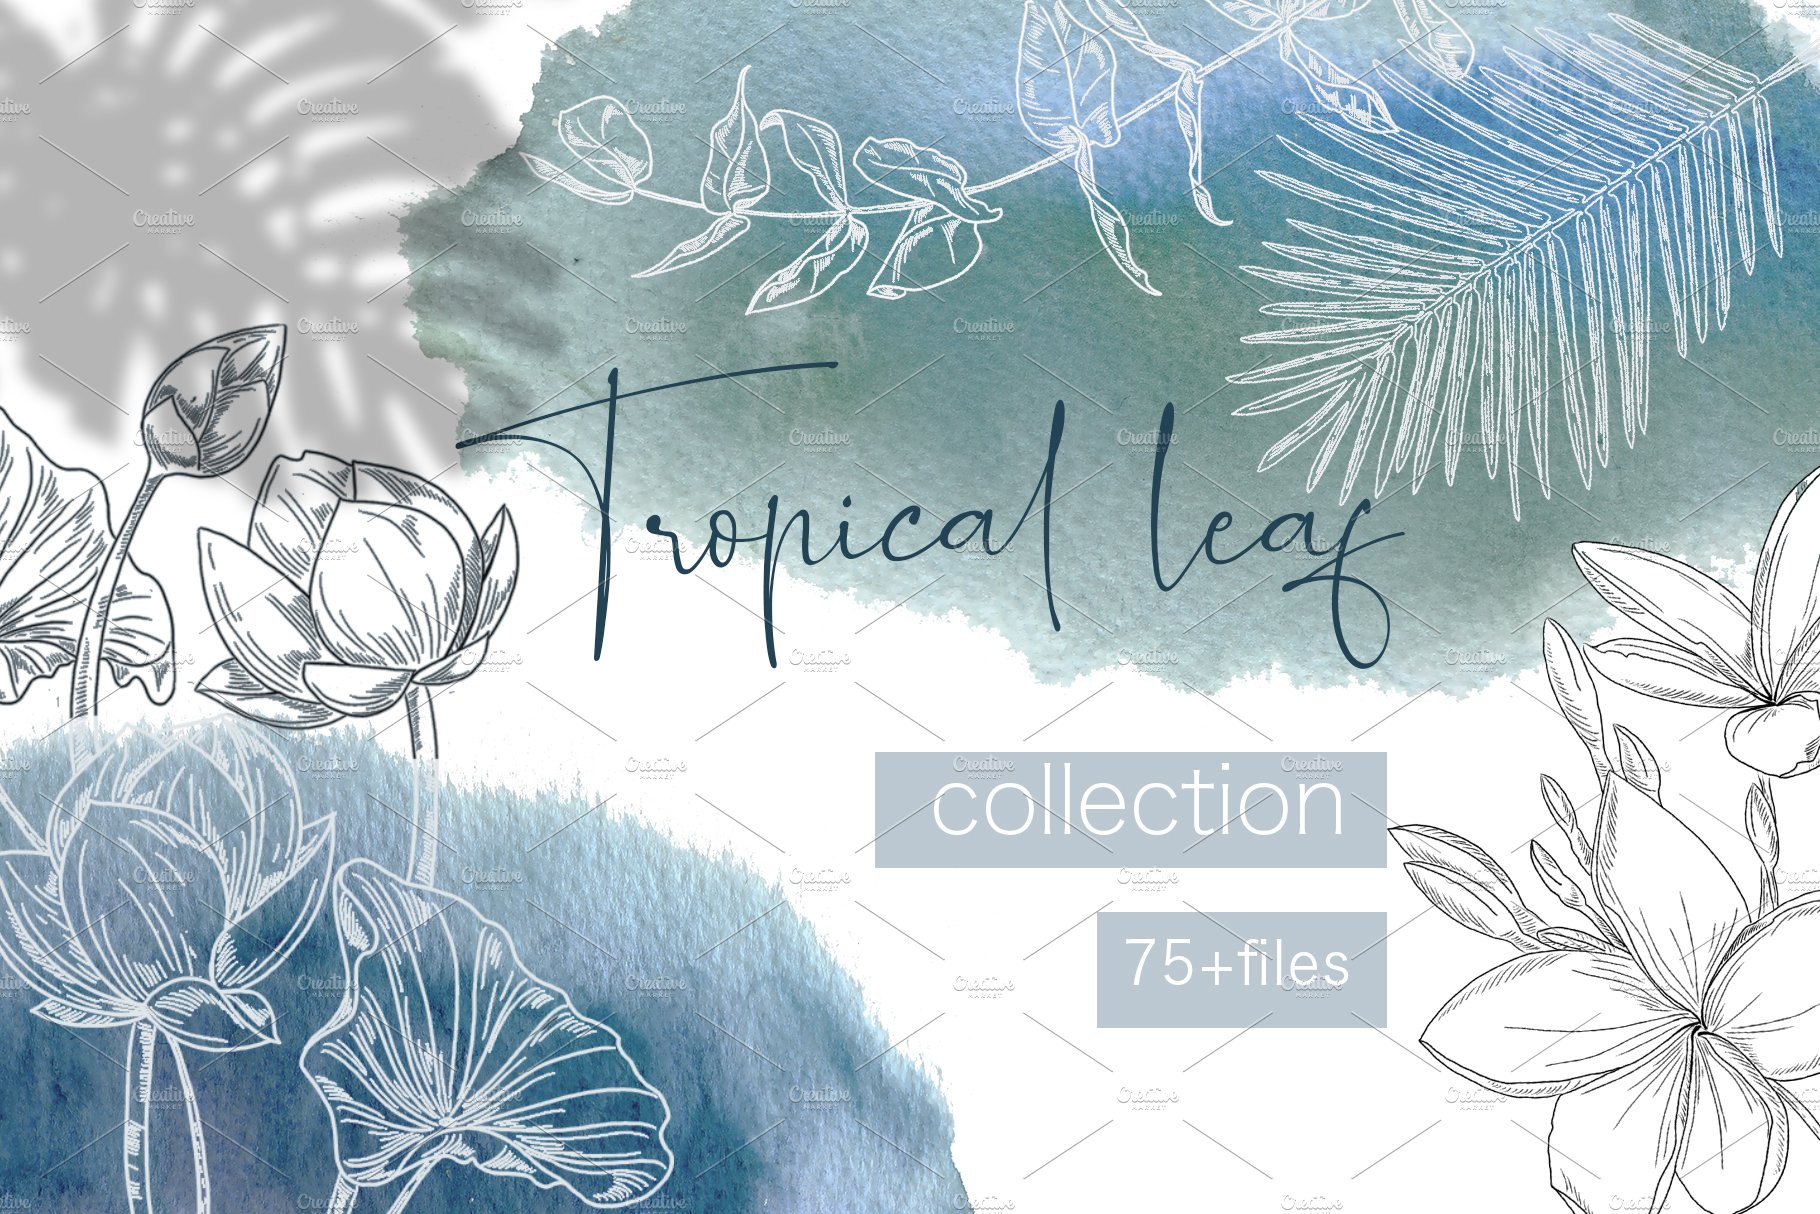 Tropical leaf collection cover image.